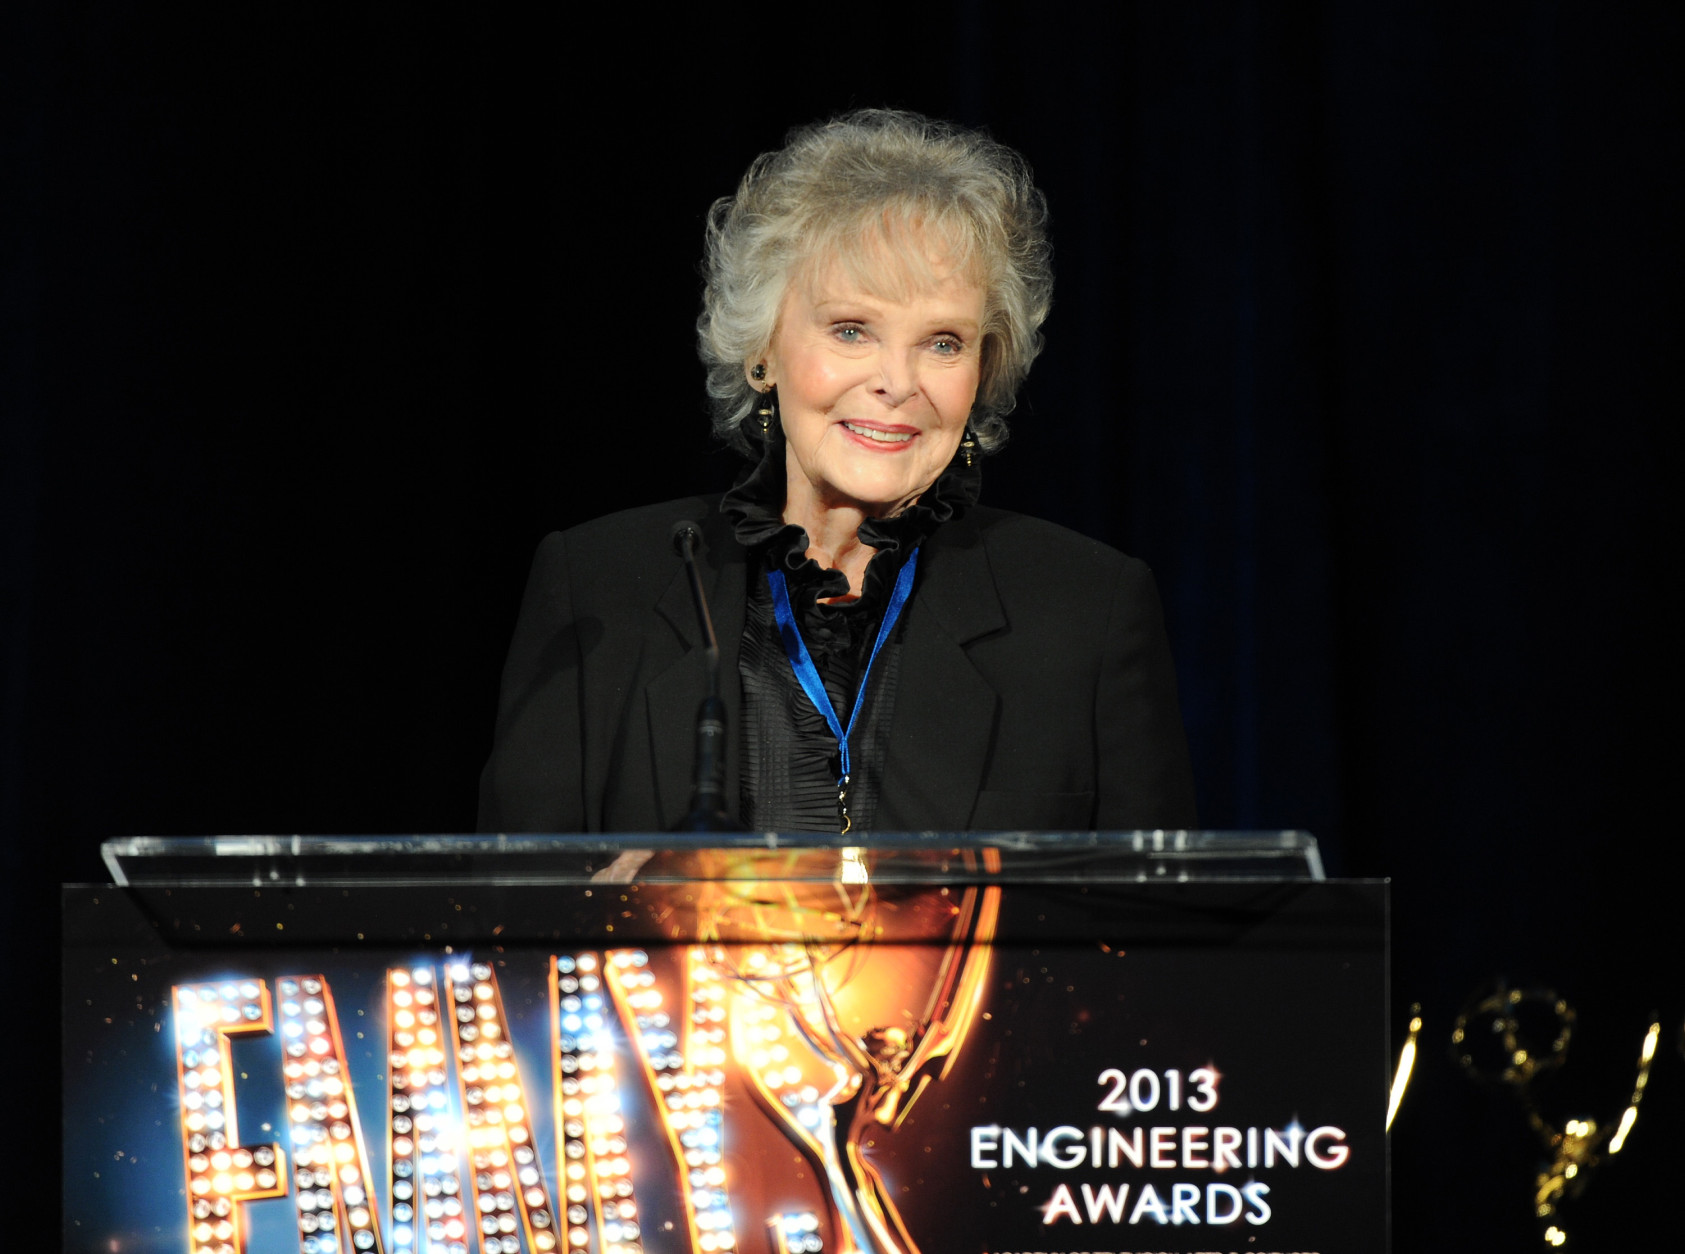 Actress June Lockhart presents the Emmy Engineering Award onstage at the 65th Primetime Emmy Engineering Awards, on Wednesday, October 23, 2013, at Loews Hollywood Hotel, in Hollywood, Calif. (Photo by Frank Micelotta/Invision for Academy of Television Arts &amp; Sciences/AP Images)